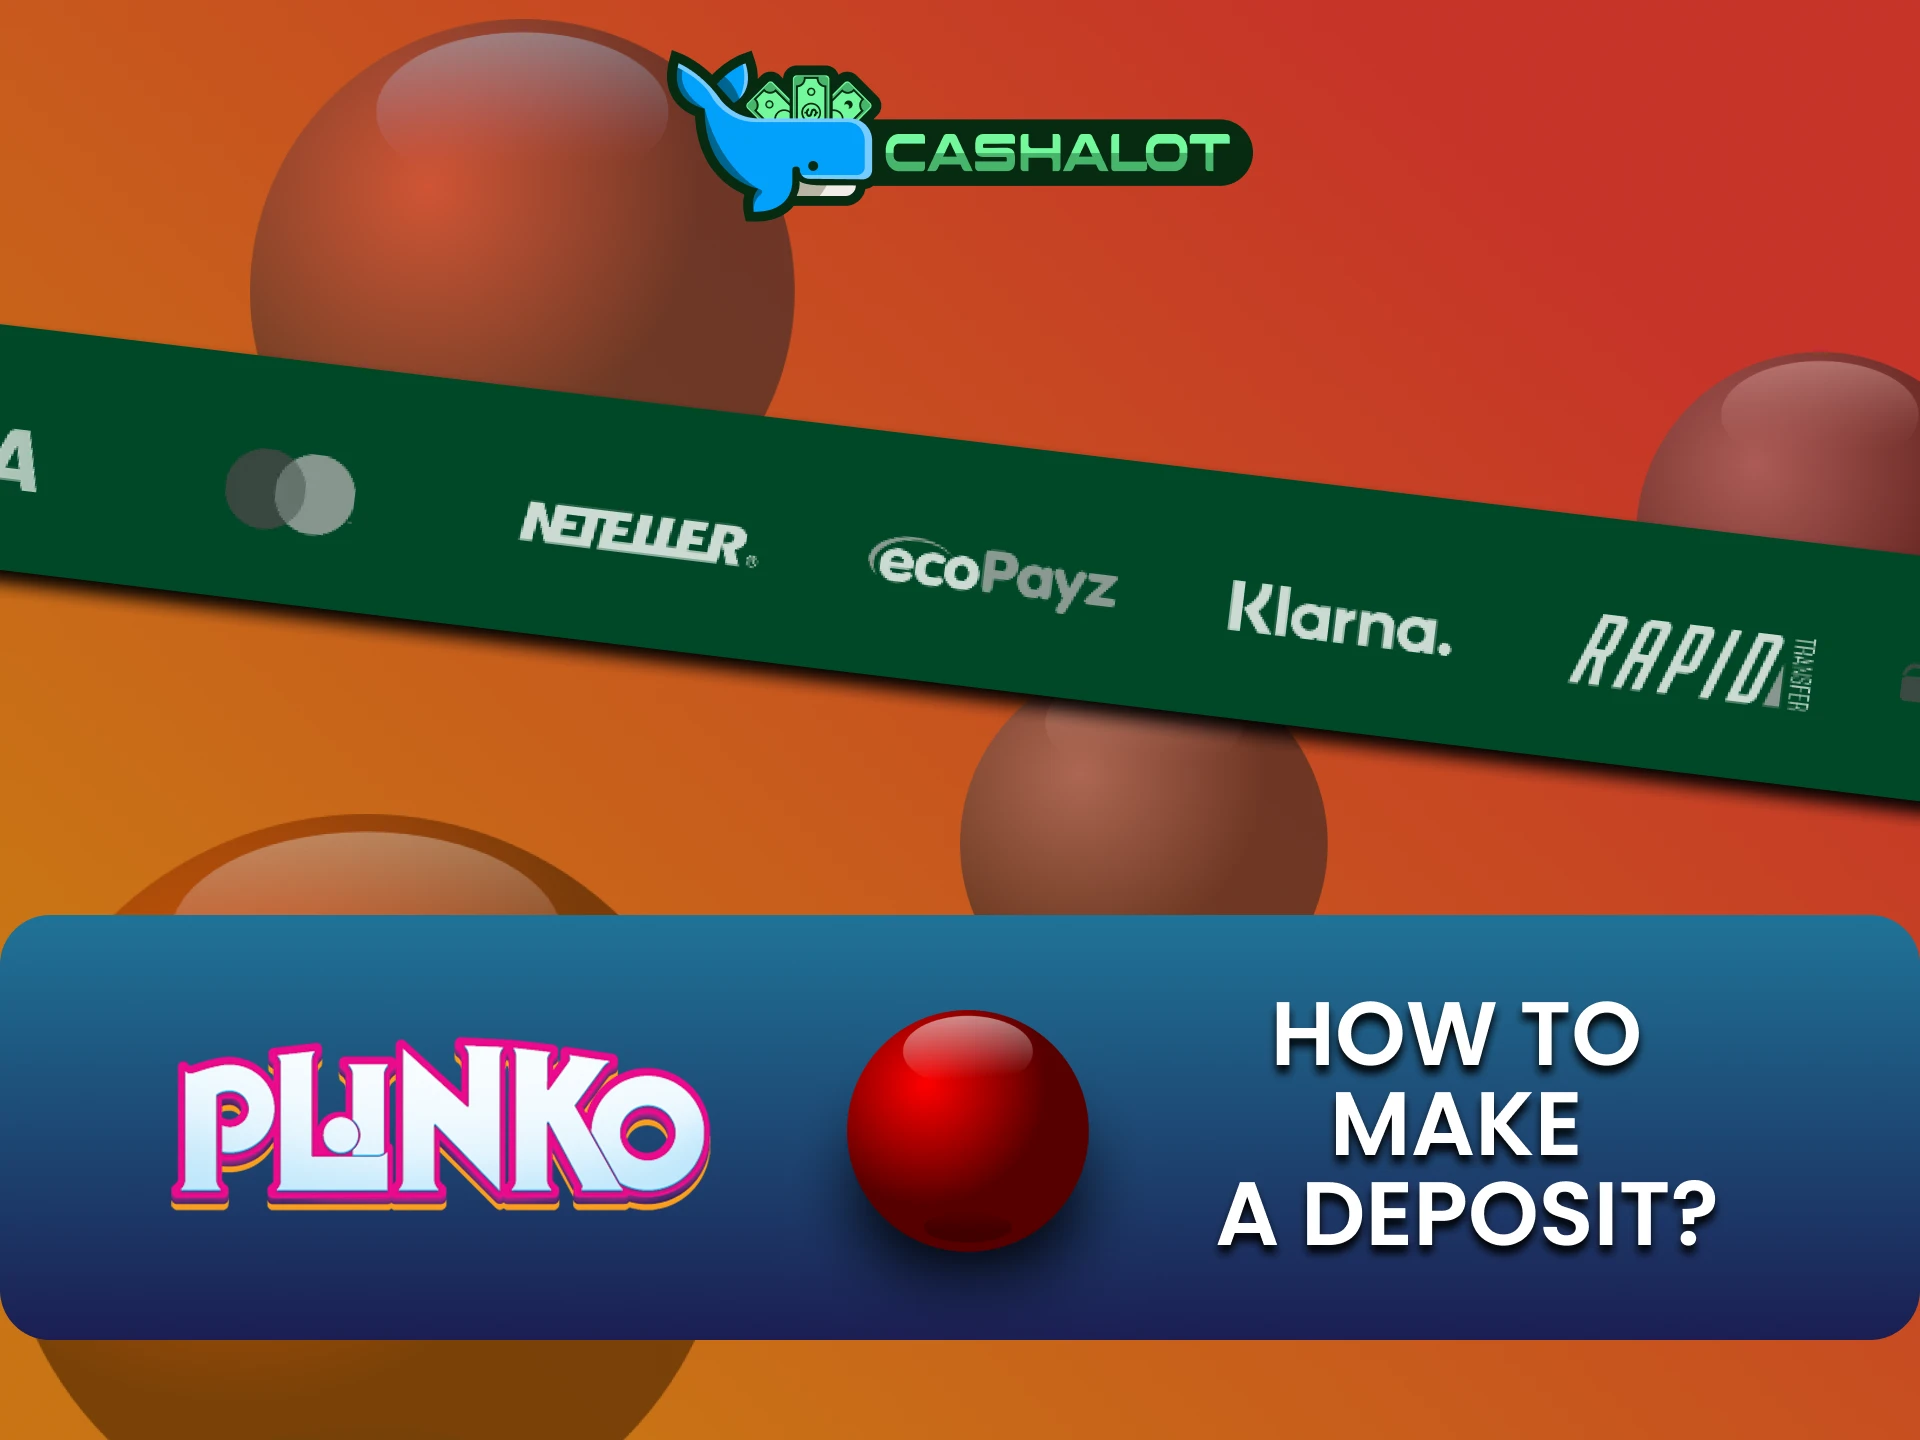 Explore ways to top up your funds on the Cashalot website for the game Plinko.